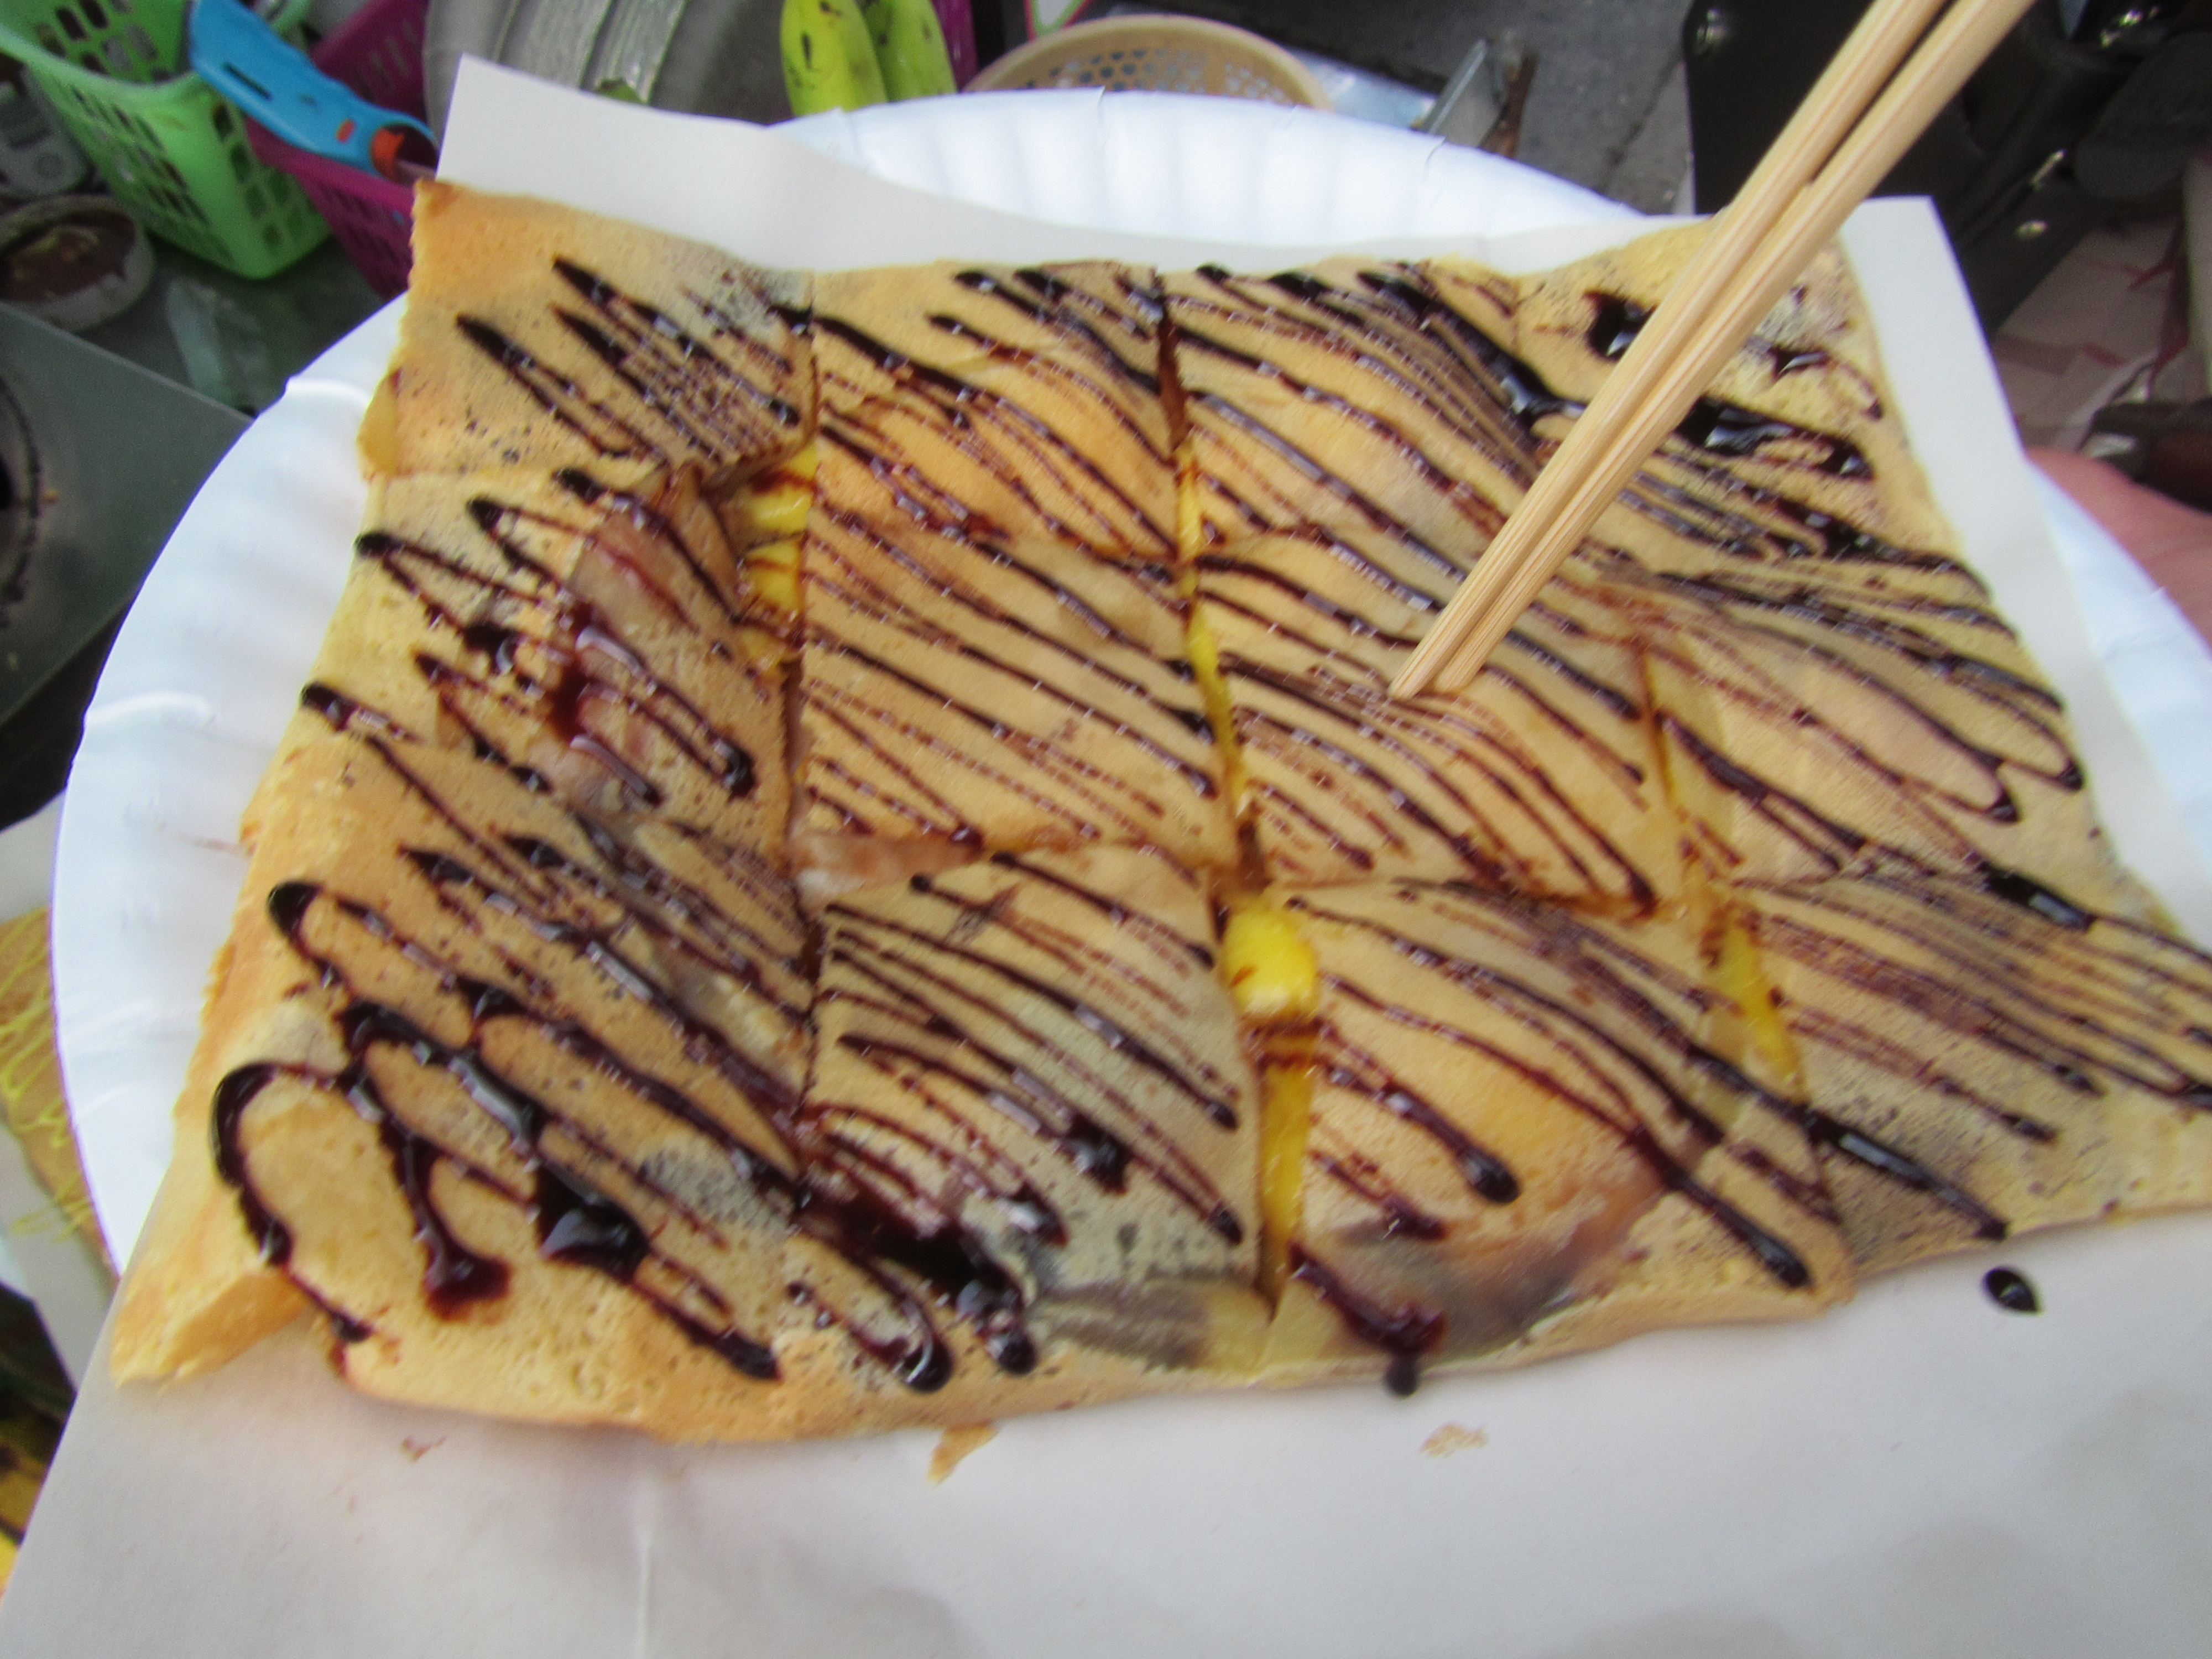 Street food crepes!  Made fresh on the grill with mango and chocolate syrup!